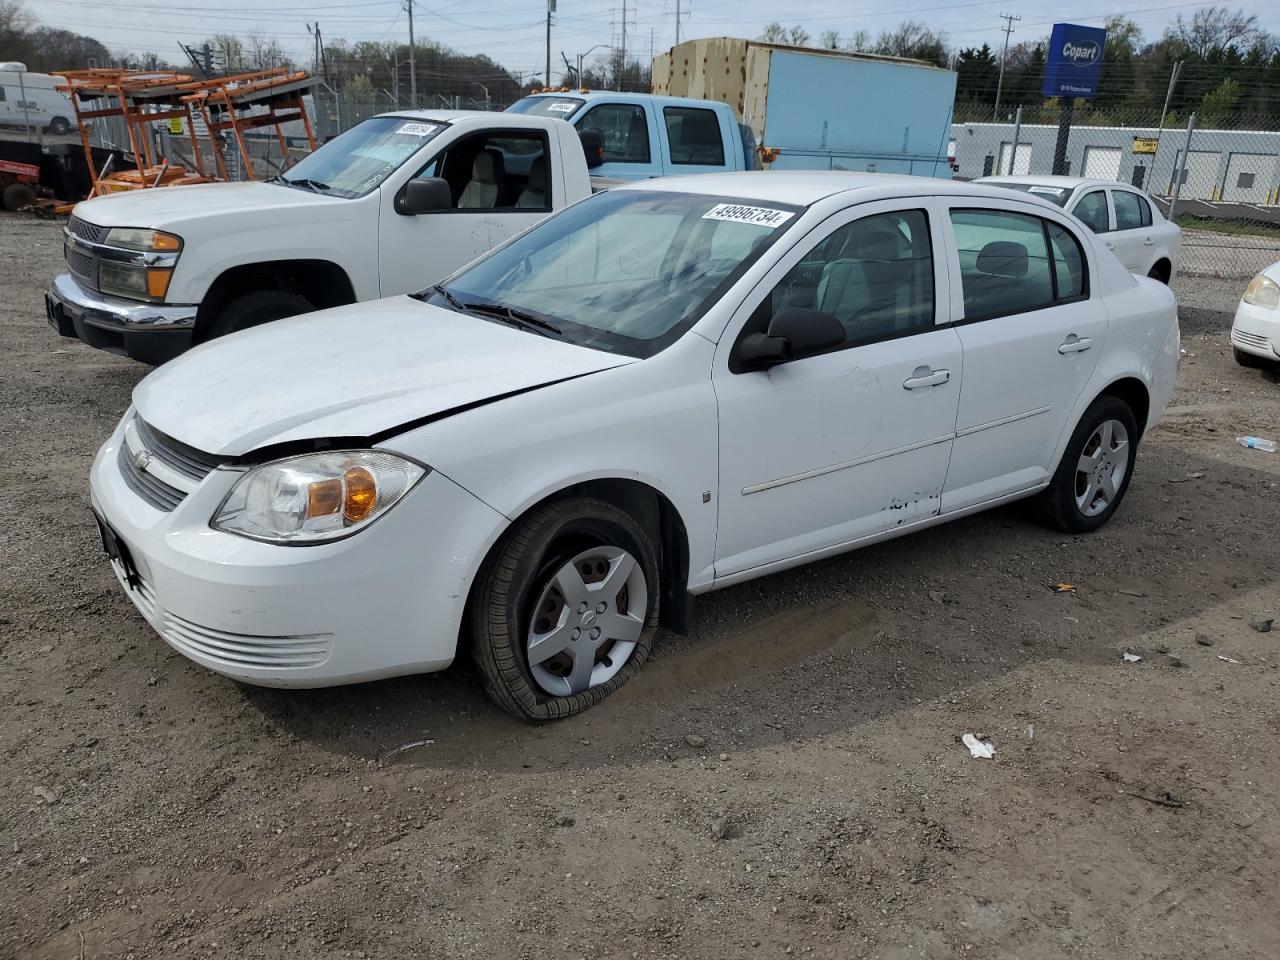 vin: 1G1AK55F287278452 1G1AK55F287278452 2008 chevrolet cobalt 2200 for Sale in 21225, Md - Baltimore East, Baltimore, Maryland, USA